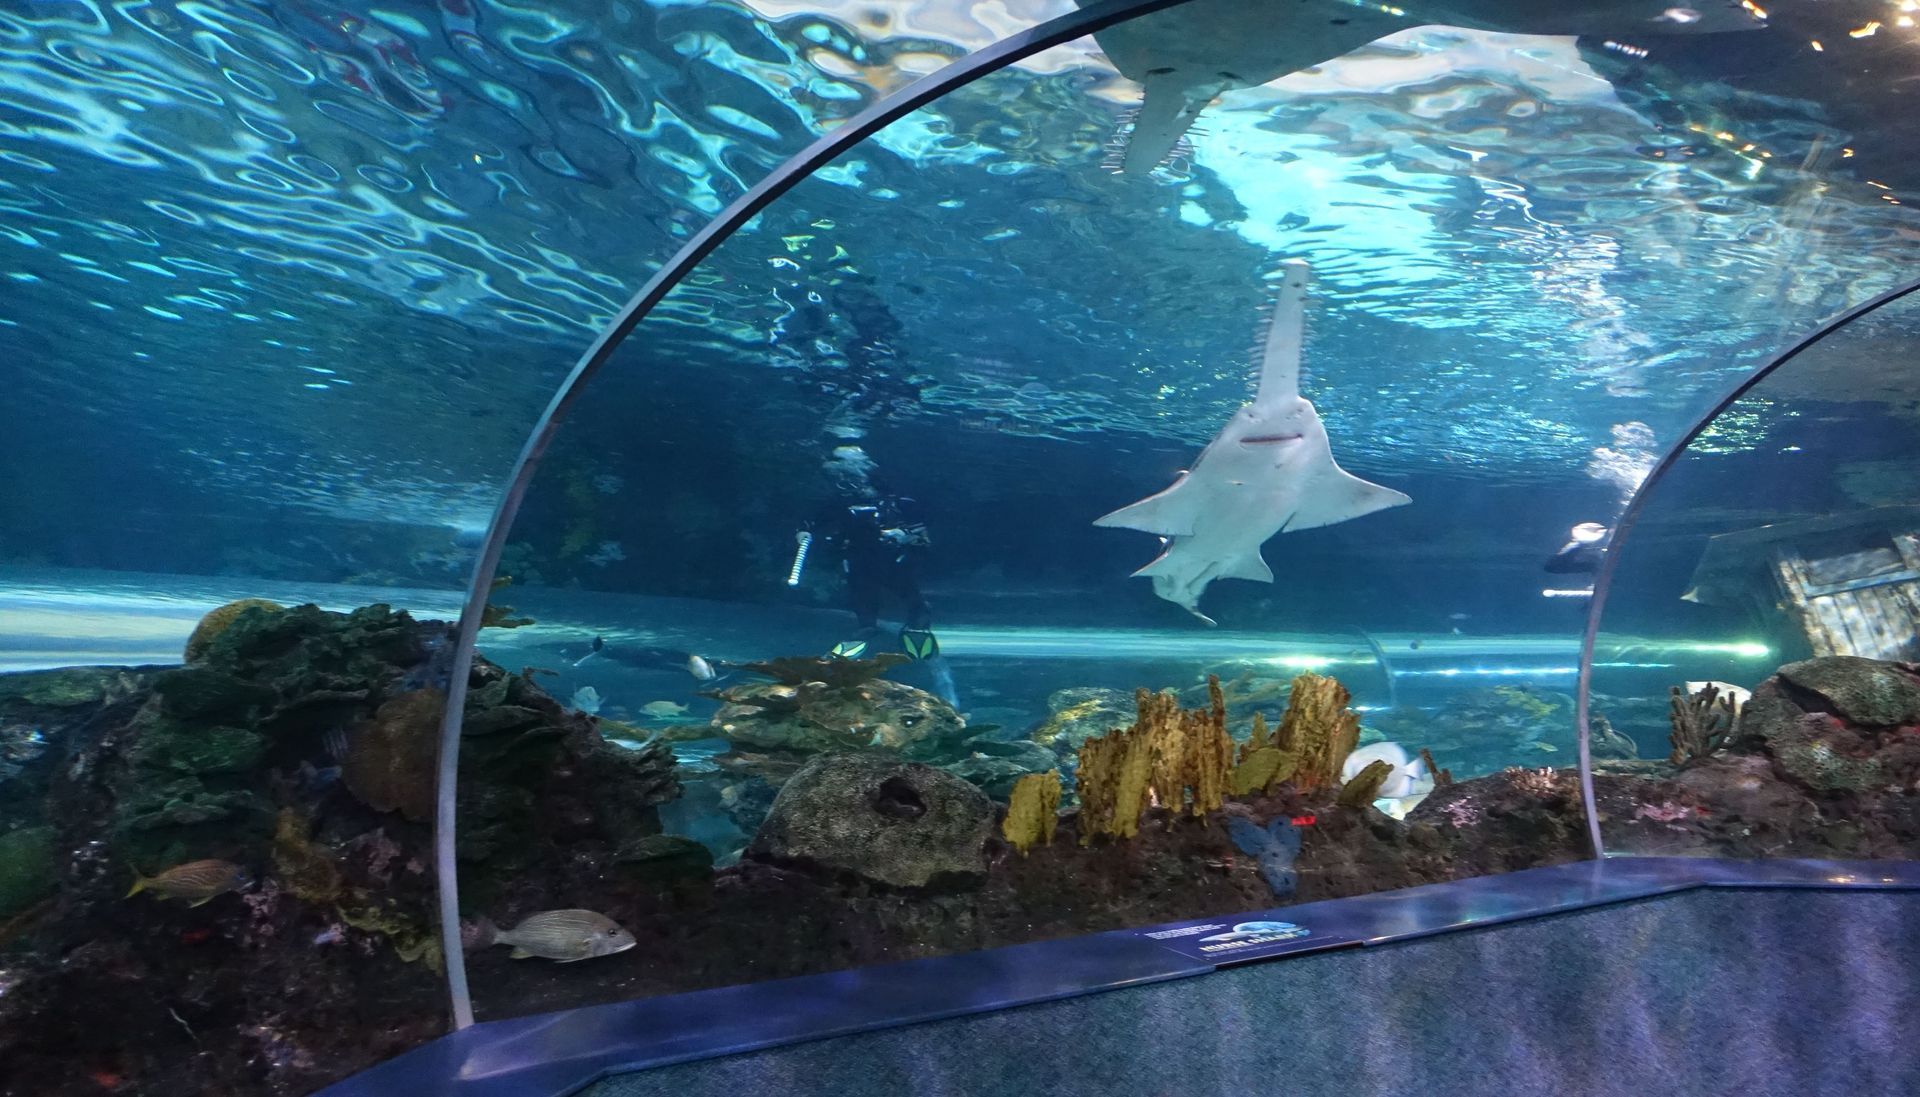 A stingray is swimming in a tunnel aquarium.